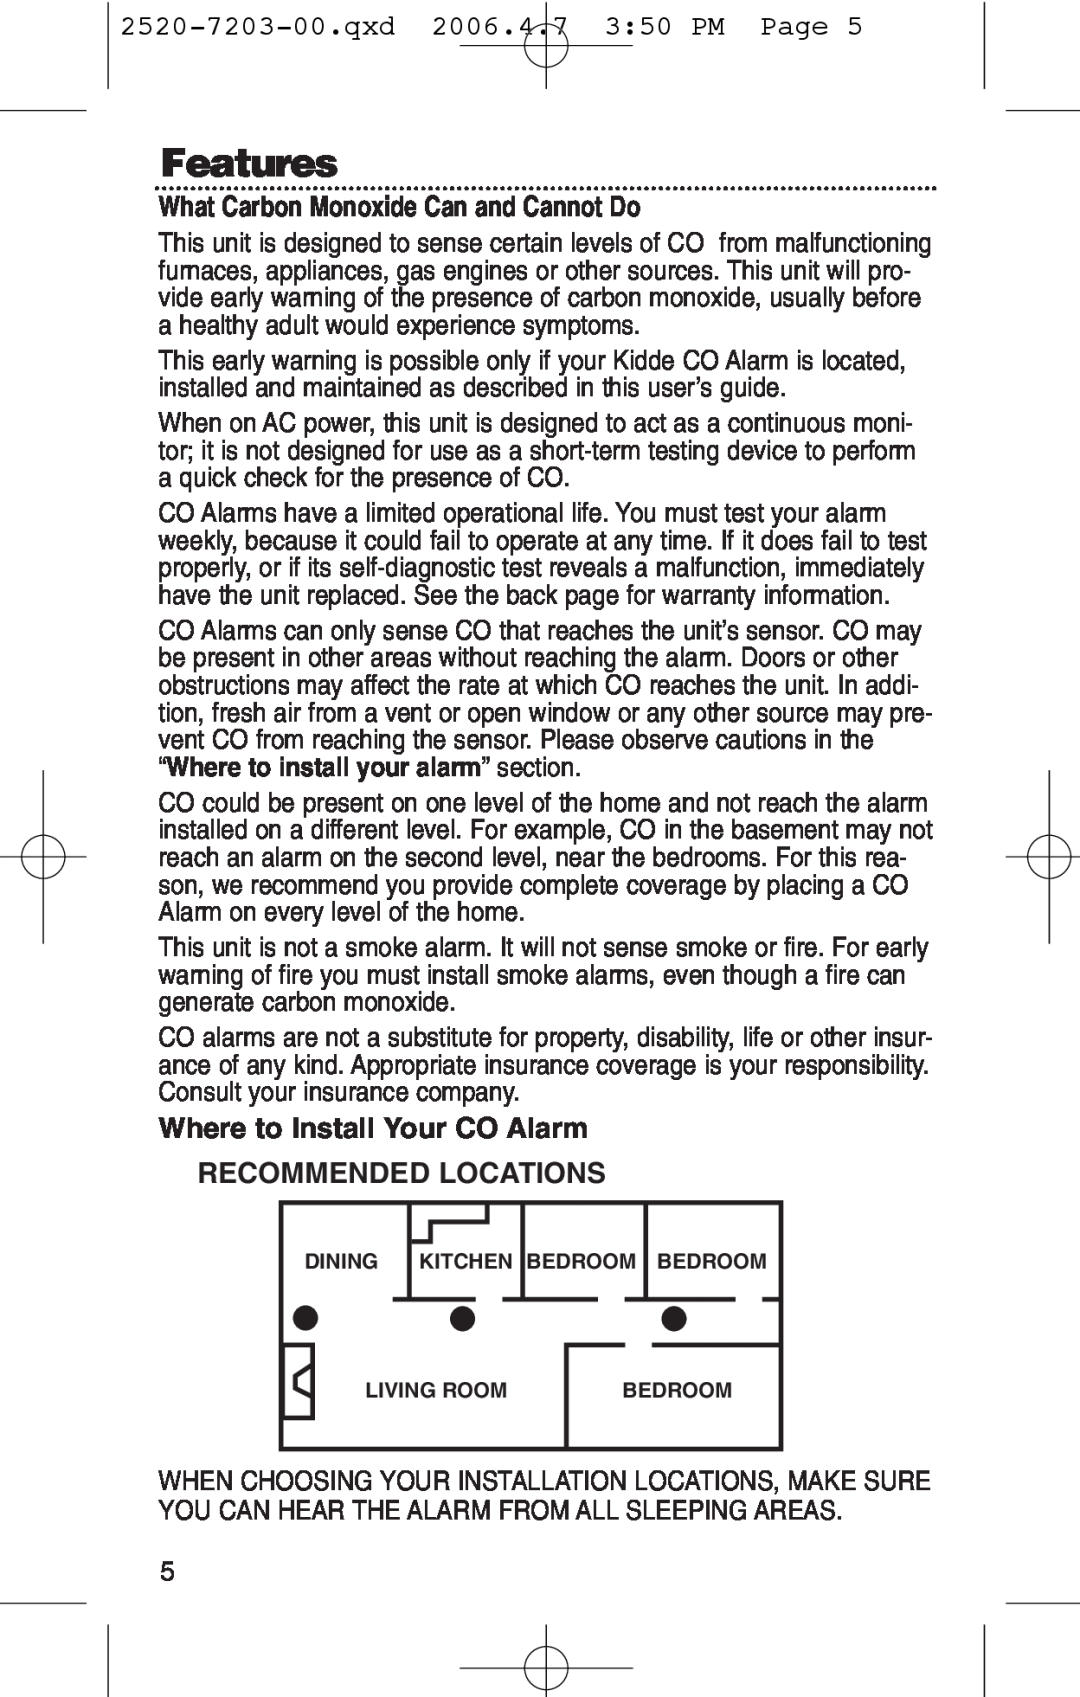 Kidde KN-COPD-3-UK manual Features, 2520-7203-00.qxd2006.4.7 3 50 PM Page, What Carbon Monoxide Can and Cannot Do 